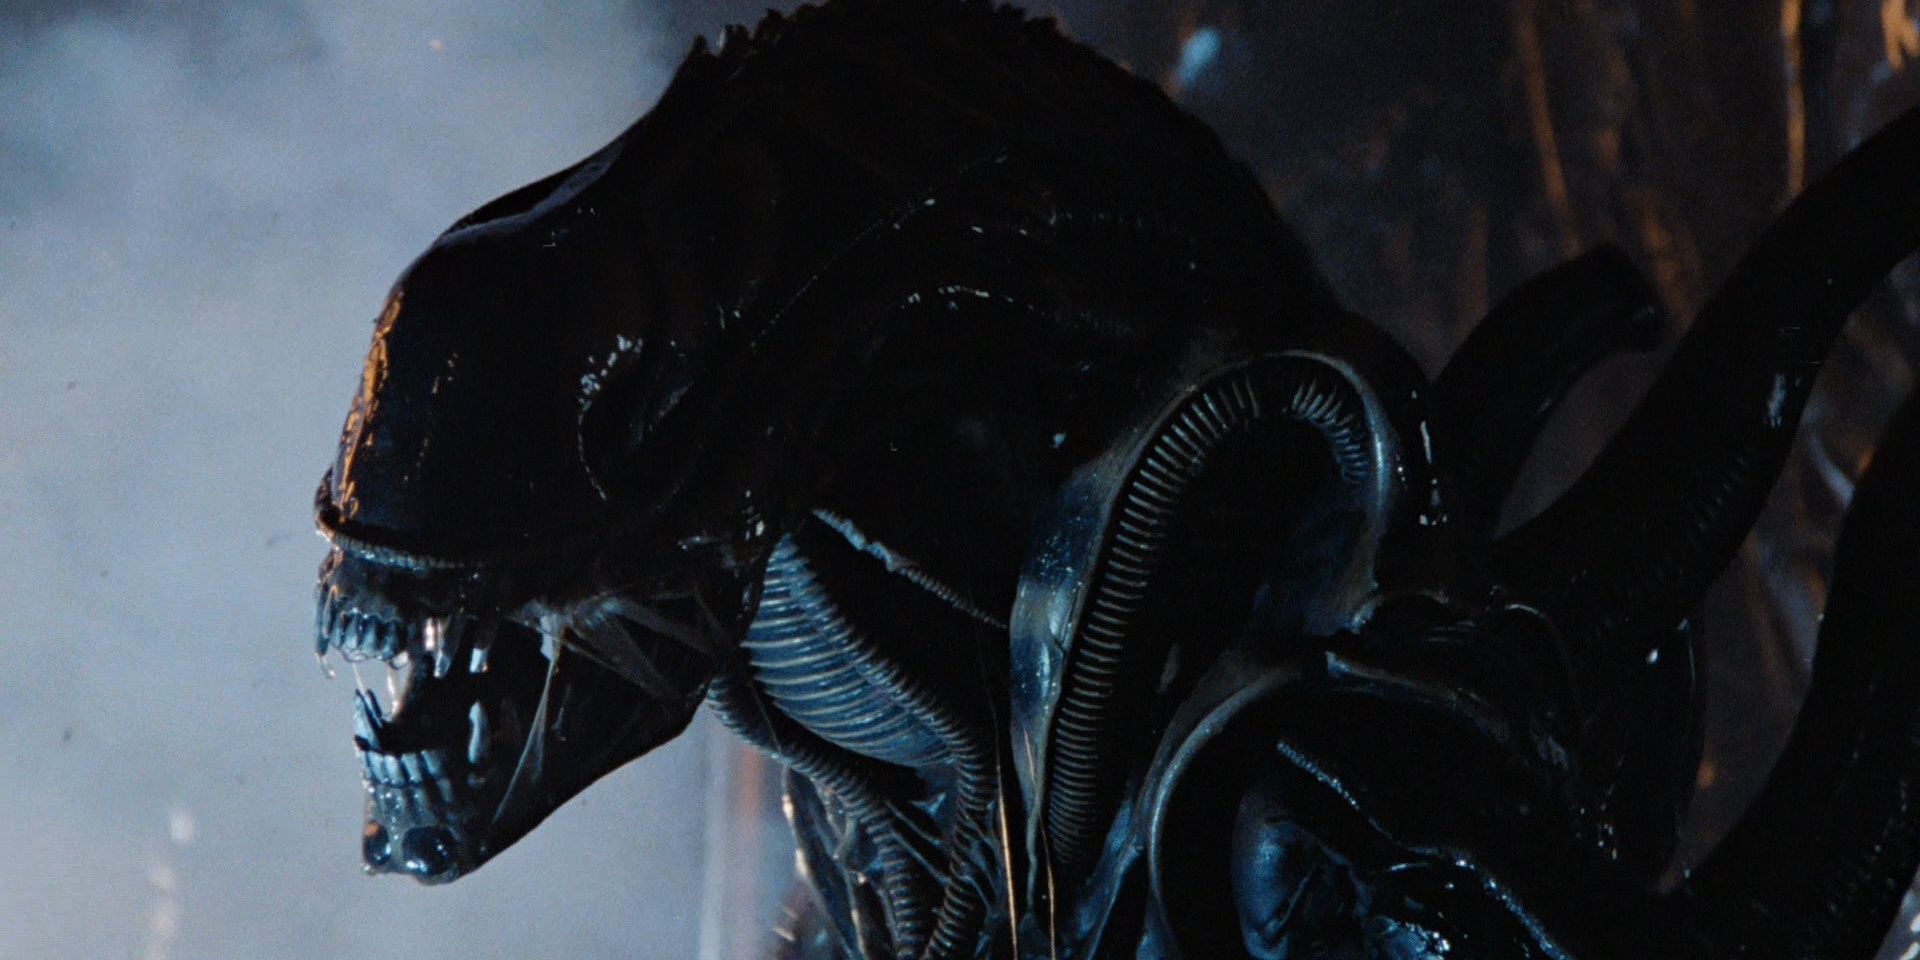 The Xenomorph opens its mouth in Alien (1979)